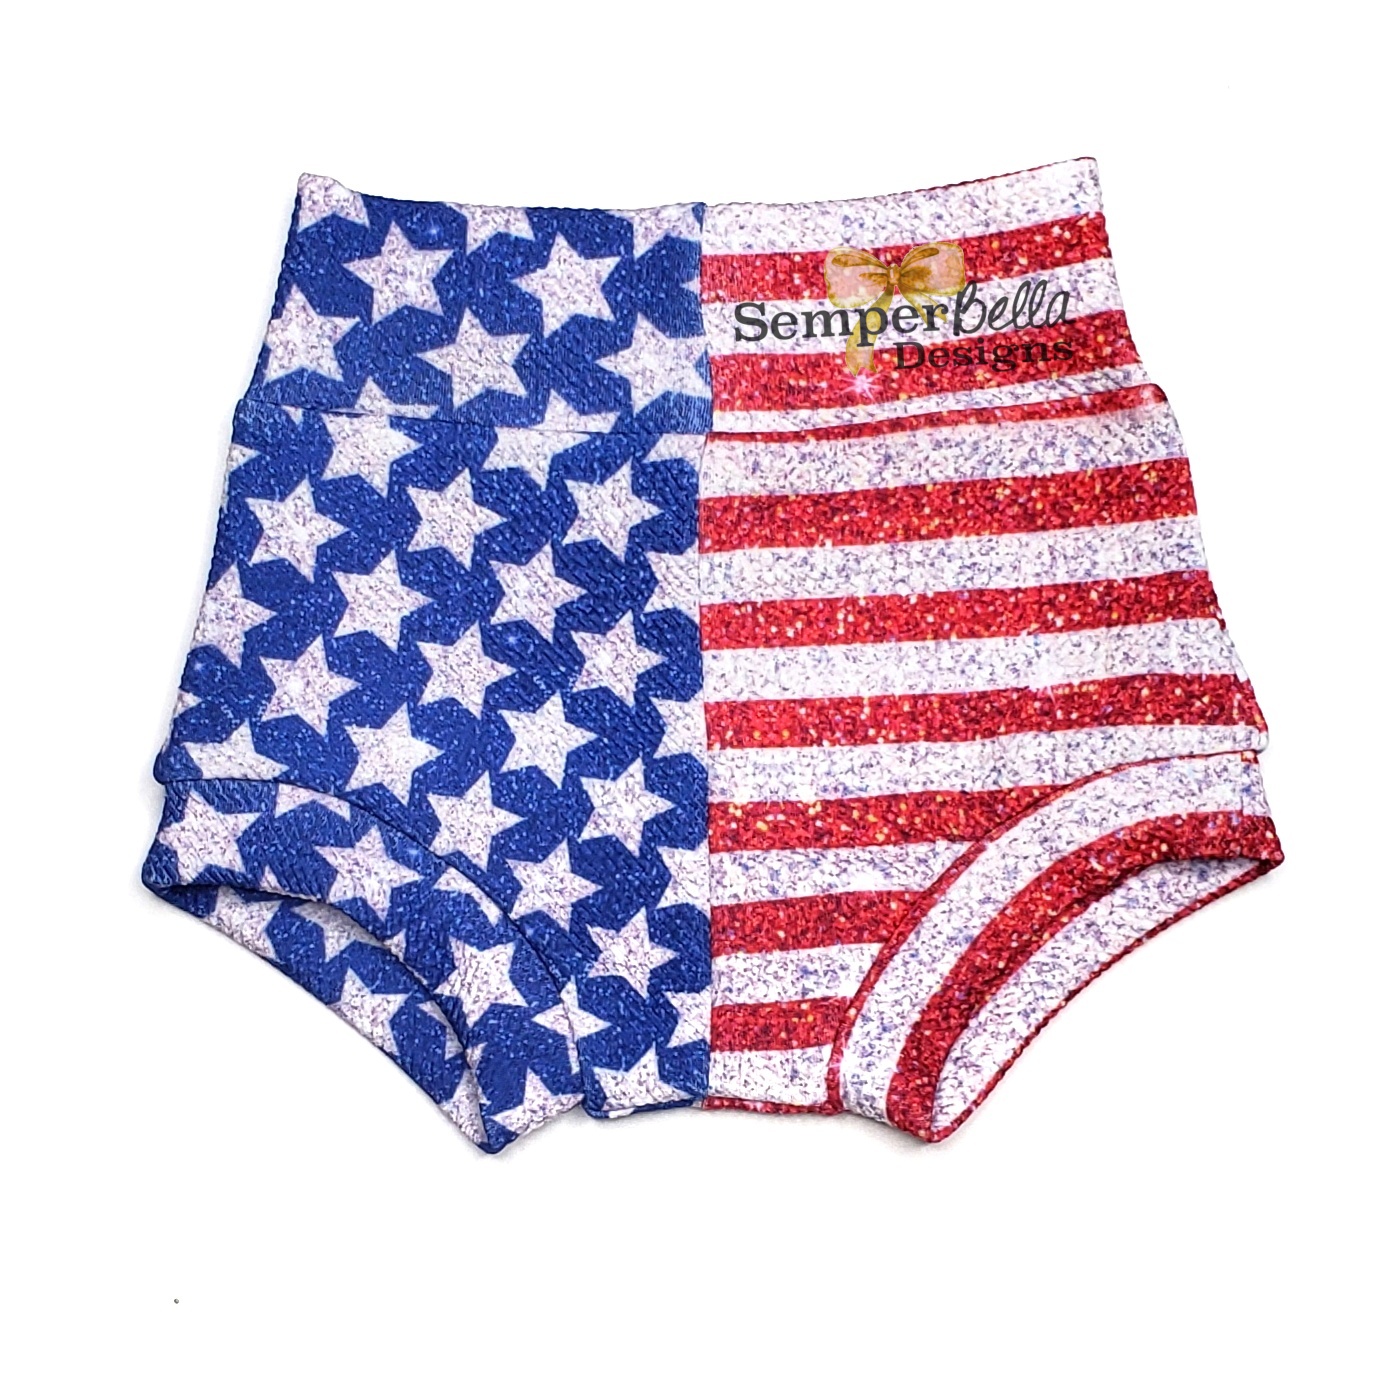 2020 Red, White and Cute Star Spangled Bummies or Shorties – Look Sew Cute